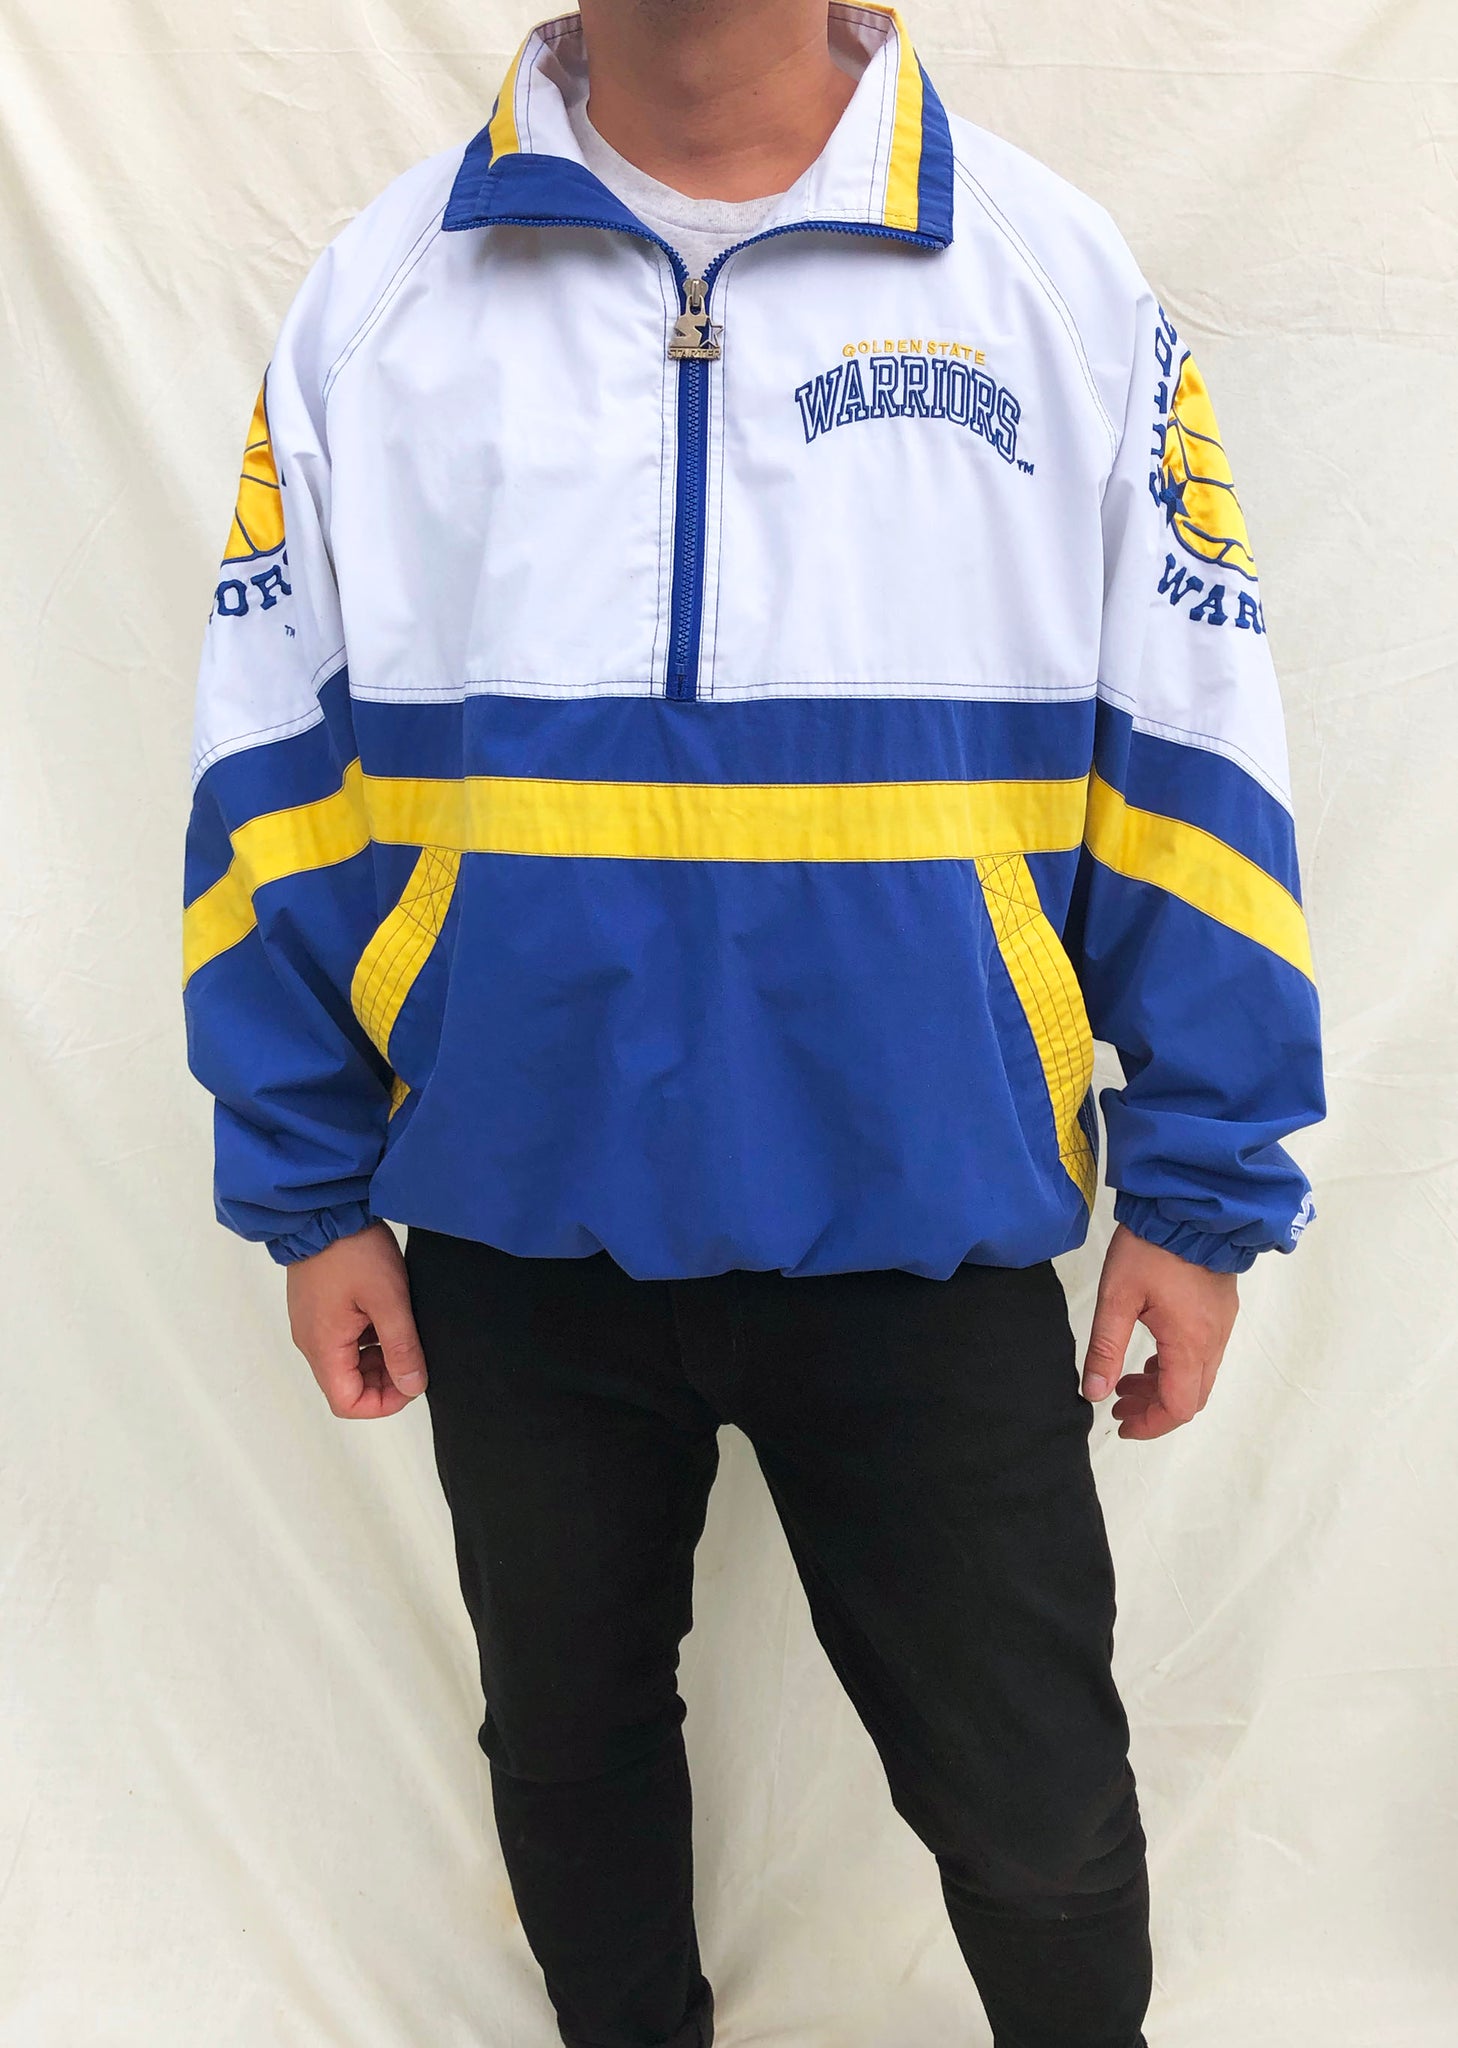 golden state warriors jacket size XL - clothing & accessories - by